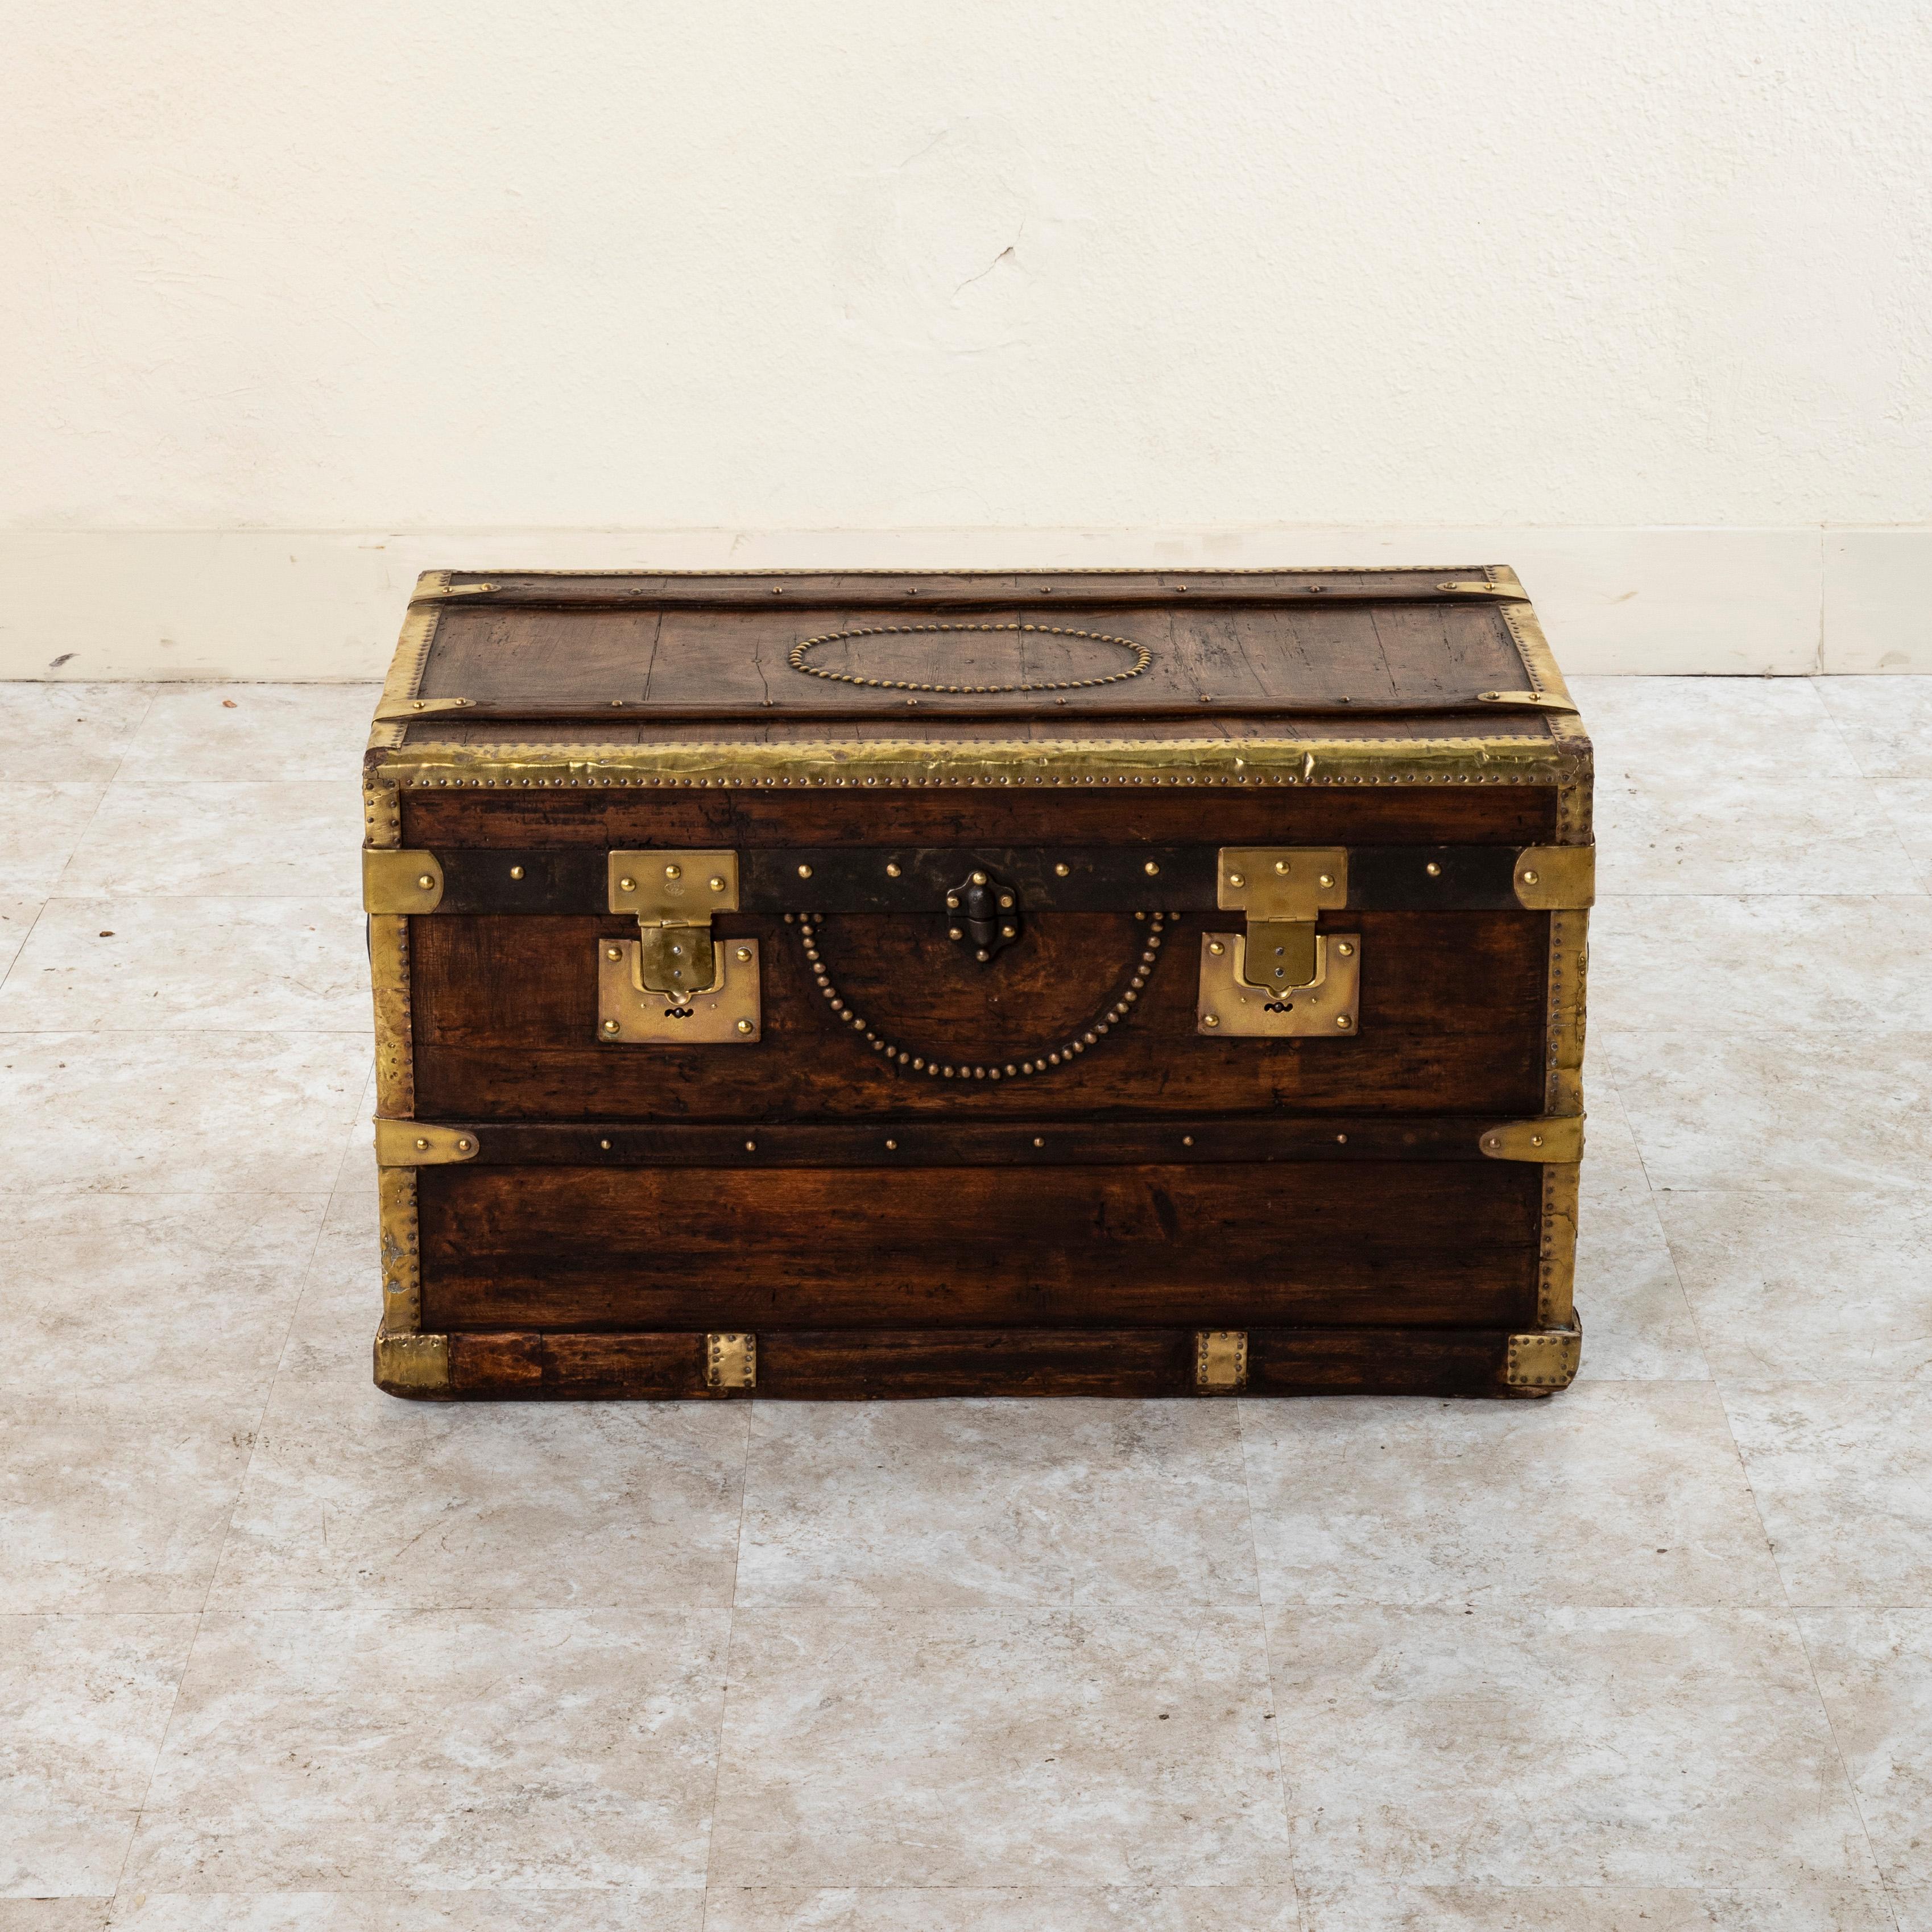 This French wooden steam trunk from the late nineteenth century features locks stamped by the maker D. Jne, Brevete S.G.D.G. Its wooden runners with brass rivets and brass corners offered protection from damage when traveling, and its original